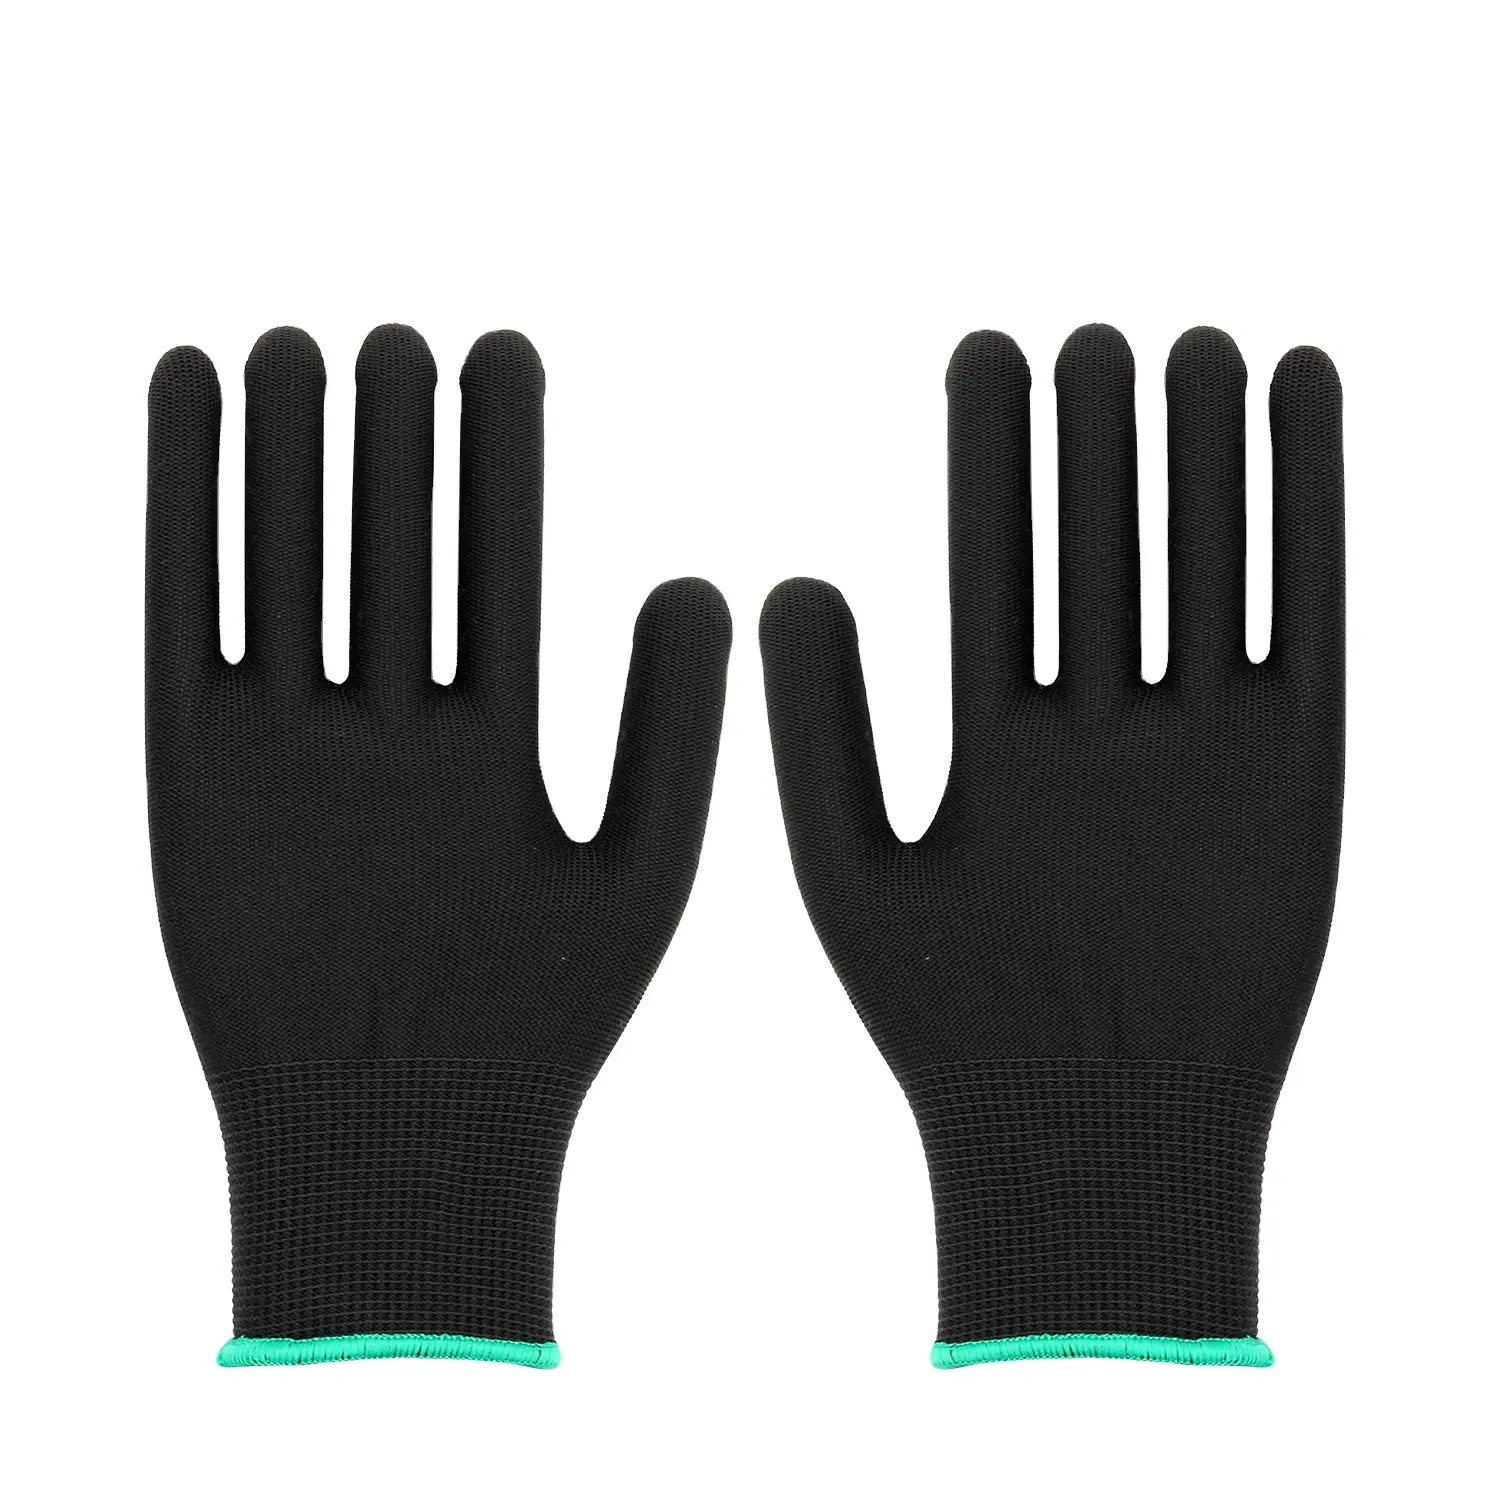 2023 most popular nitrile coated work gloves safety construction durable industrial work glove